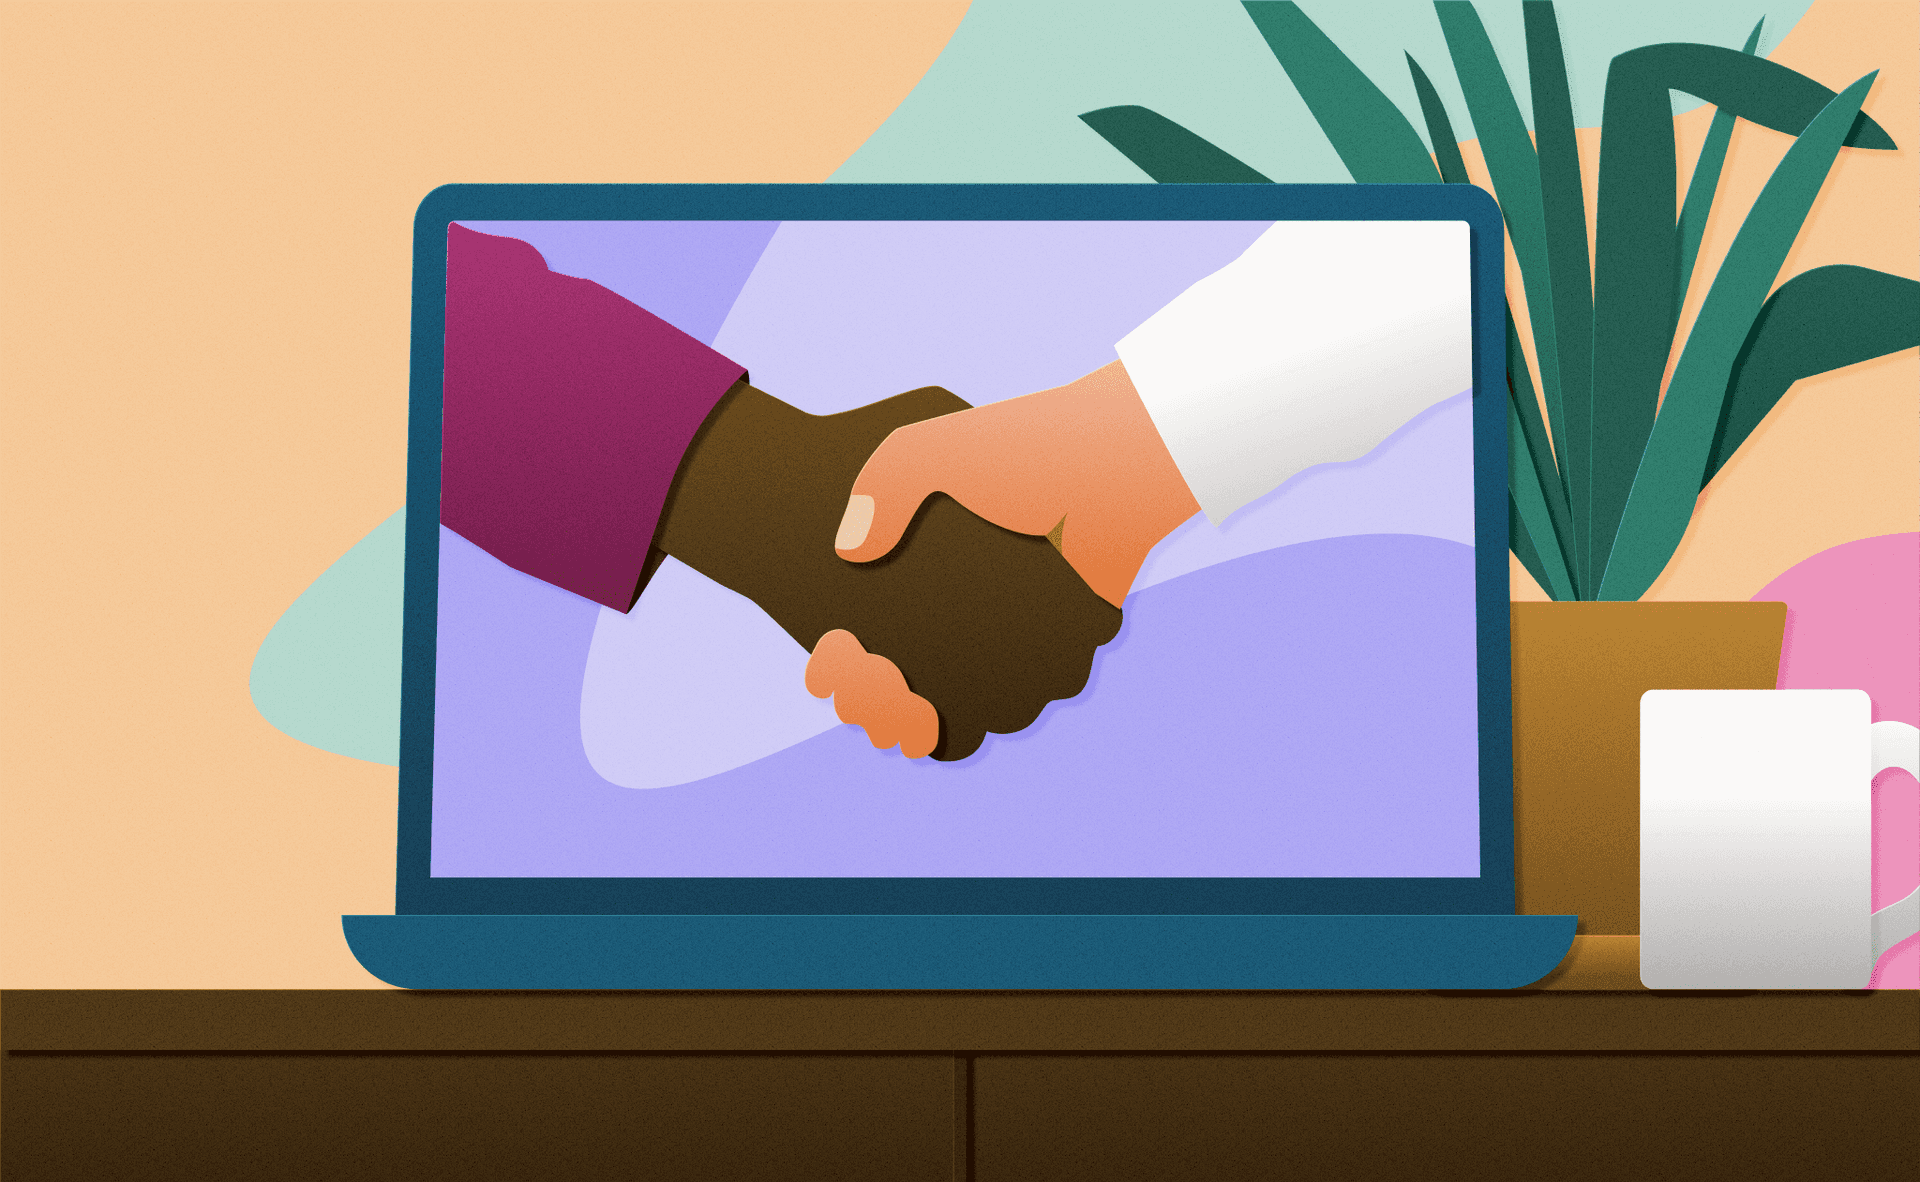 Illustration of a laptop screen showing a handshake between two people with different skin colors.